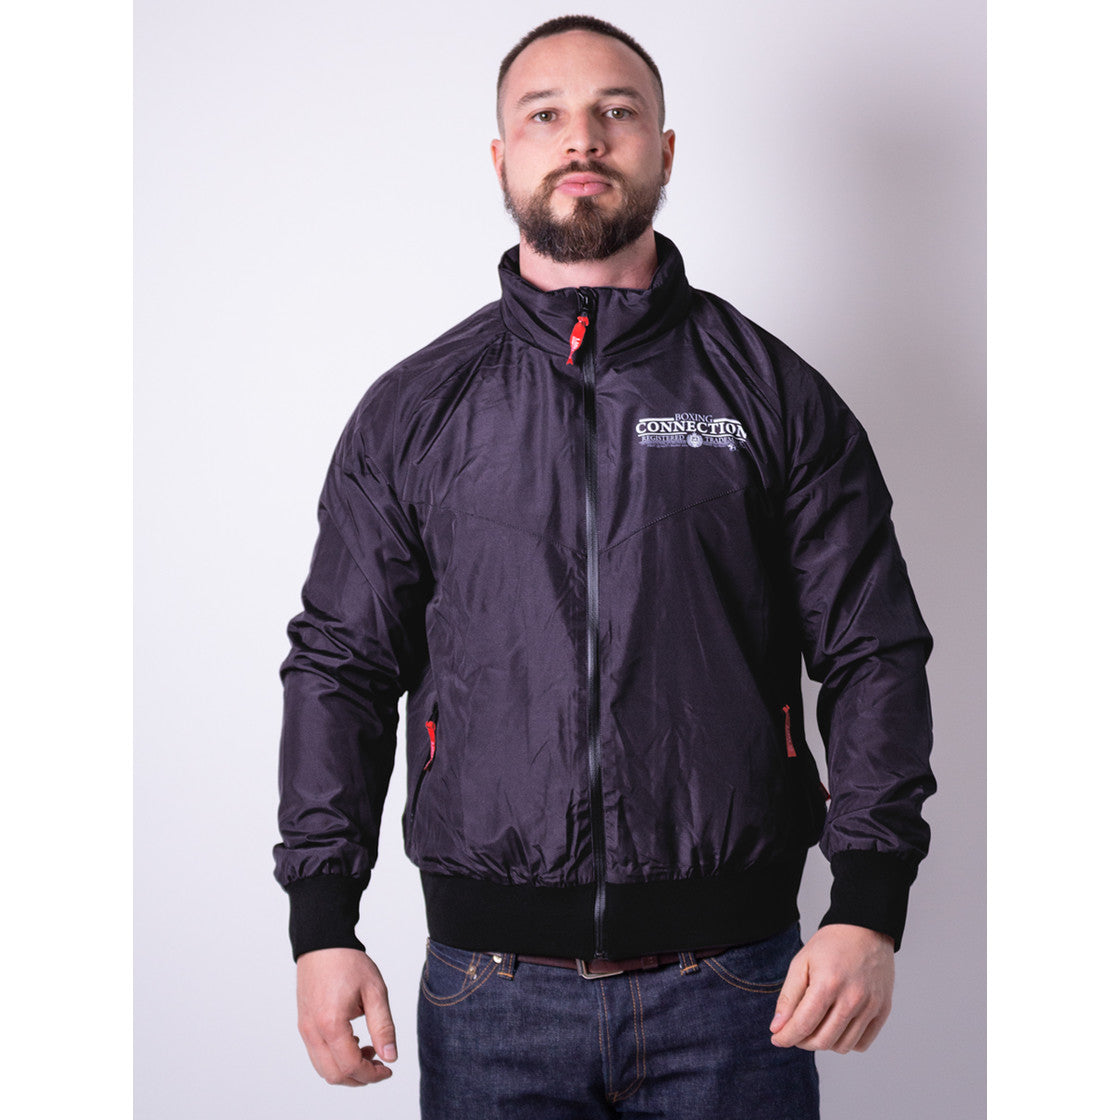 Jacke "Connection" no-limit-fitness-and-fight-shop.myshopify.com